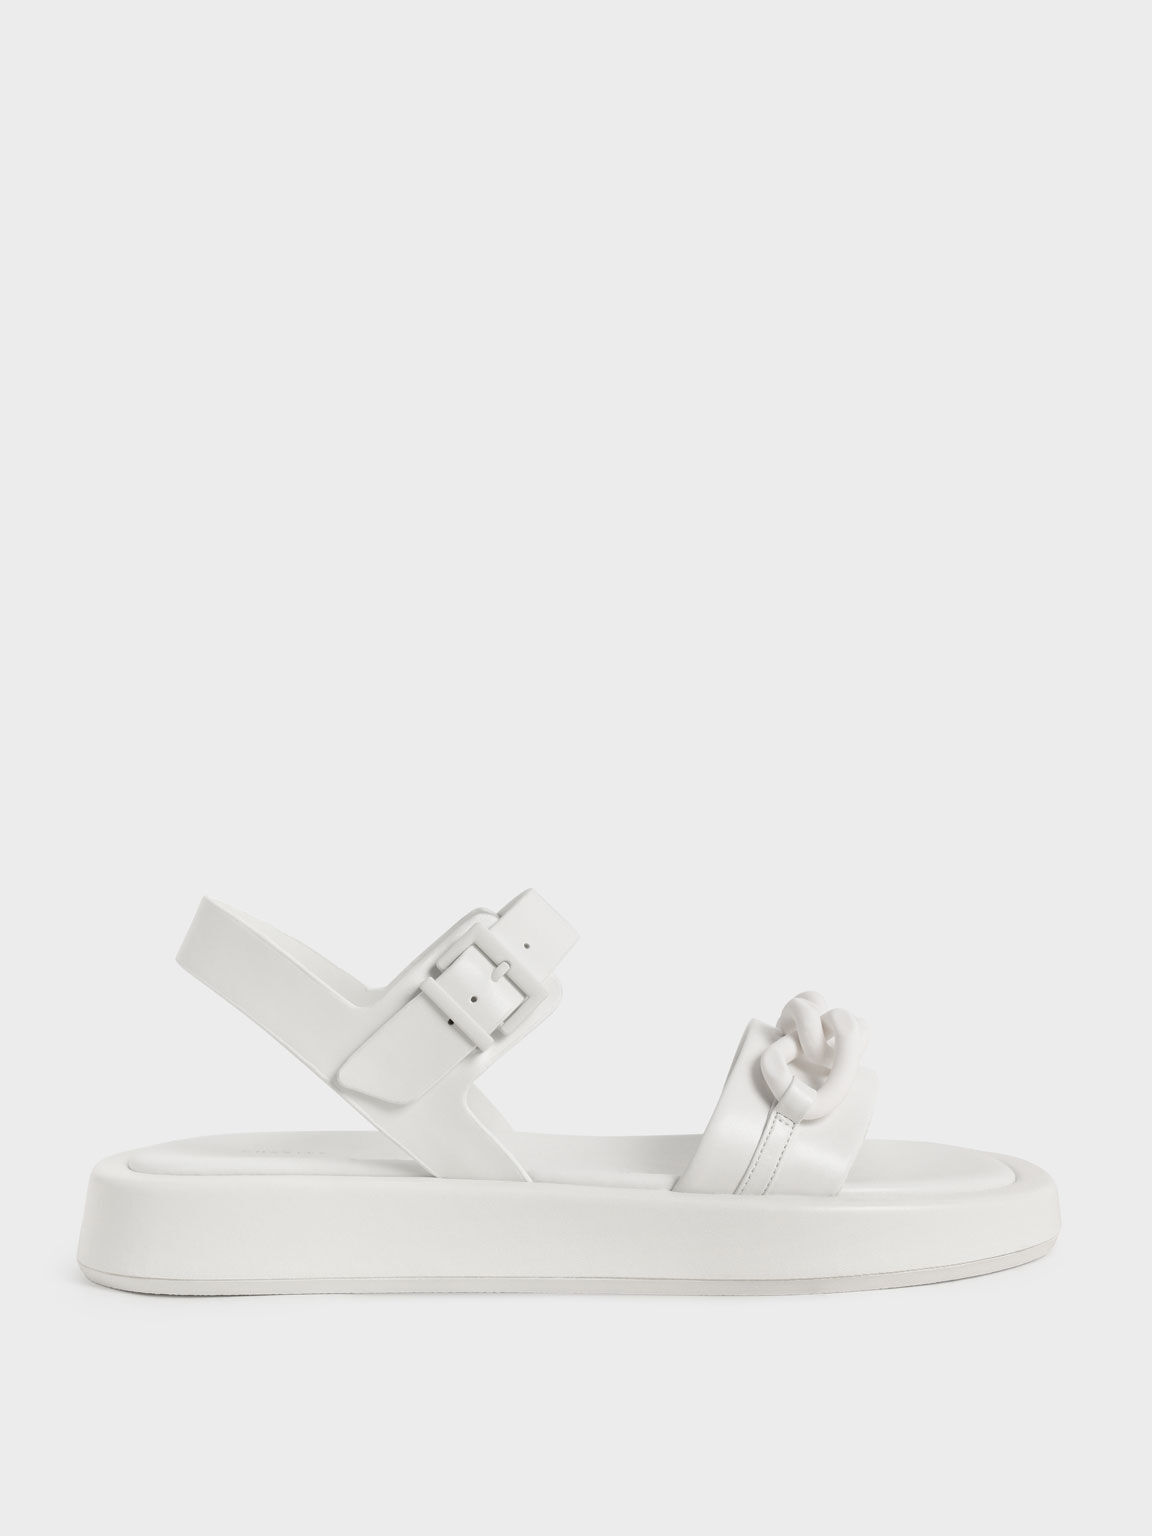 CHARLES & KEITH Faux Leather Sandals, Black at John Lewis & Partners